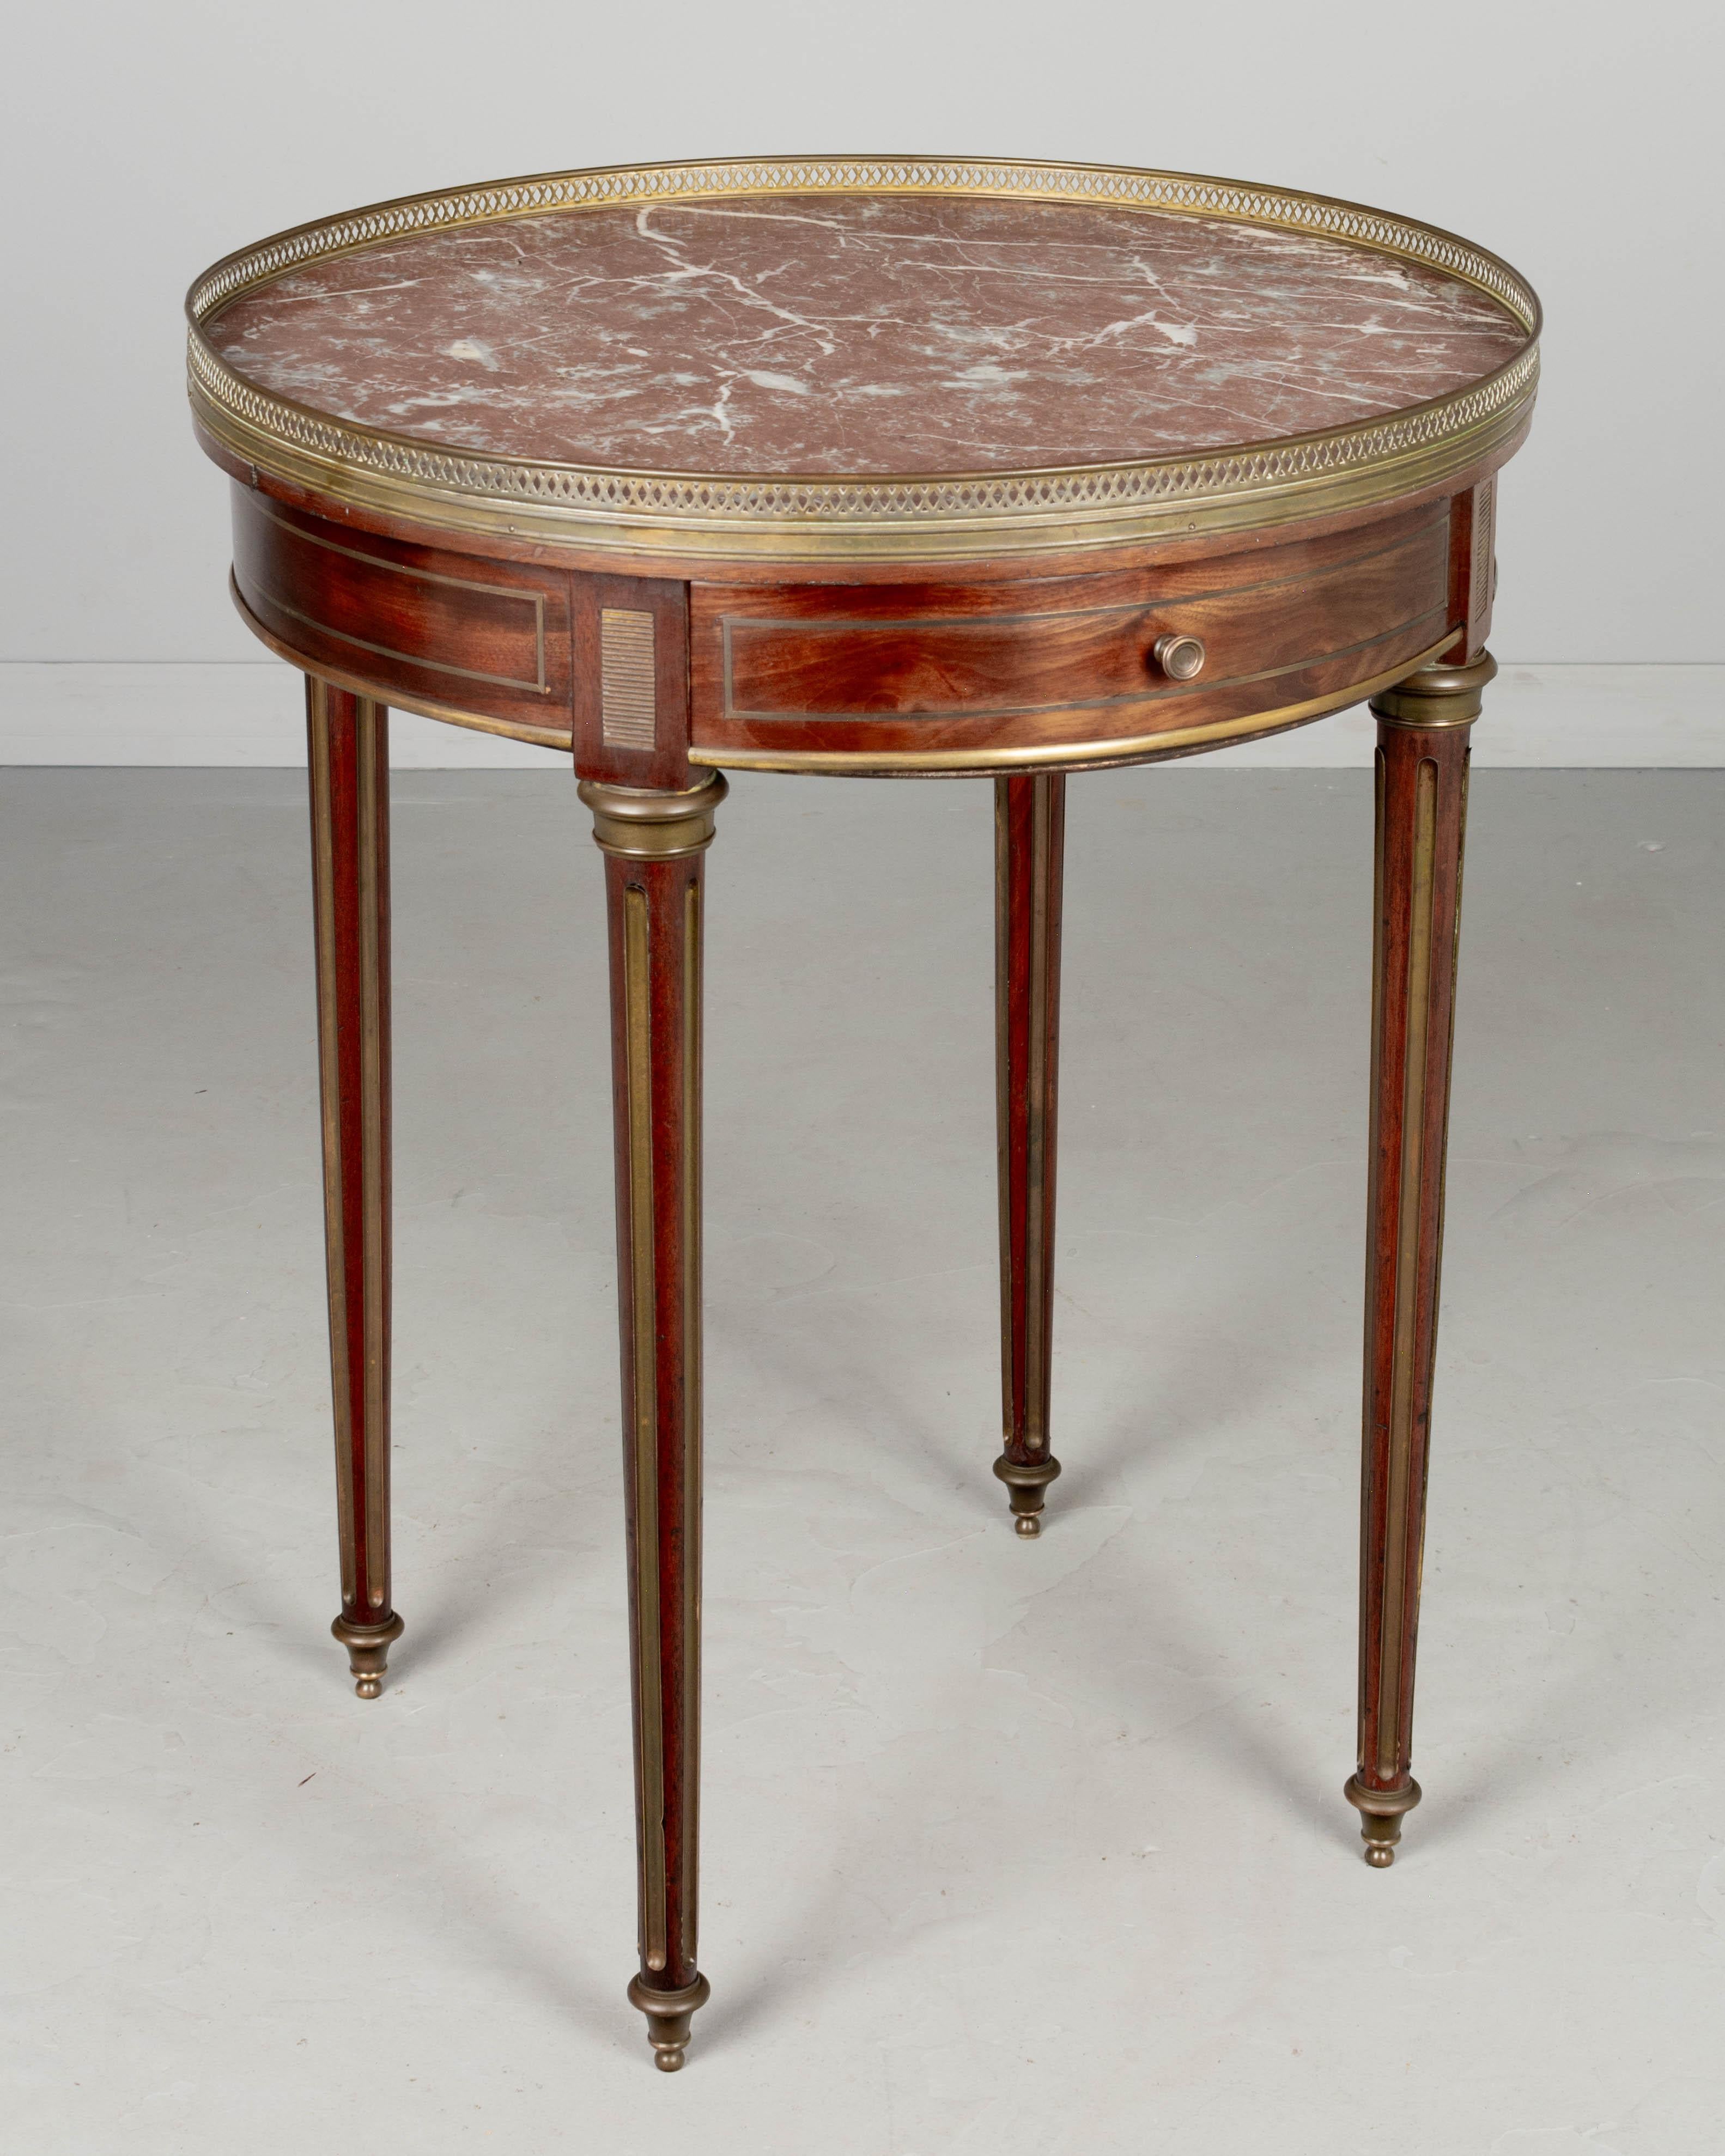 A Louis XVI style mahogany bouillotte table with a small drawer, fluted tapered legs and original Laguedoc red marble top. Inlaid brass details, sabots and gallery. Circa 1900-1920.
30